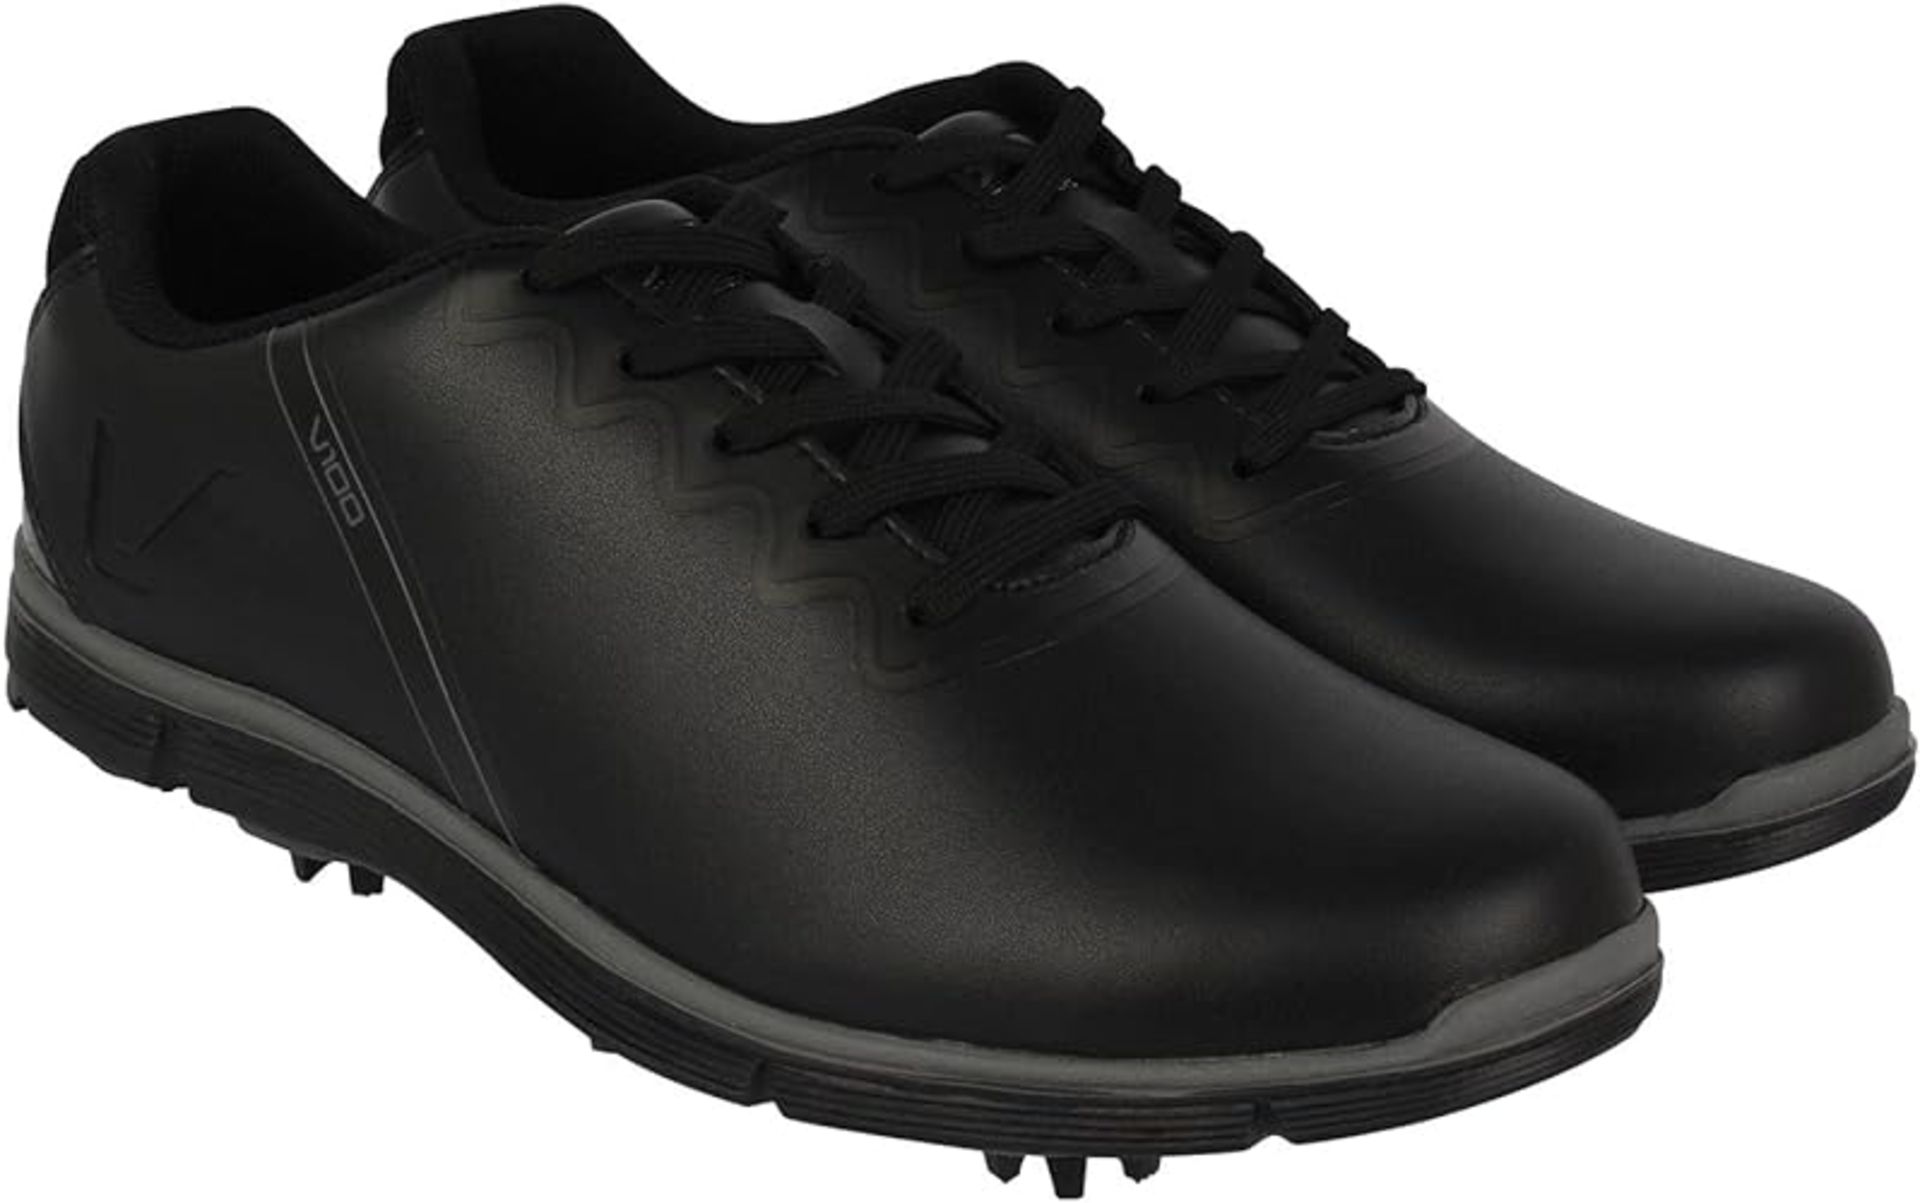 2 X BRAND NEW PAIRS OF SLAZENGER BLACK V100 PROFESSIONAL GOLF SHOES SIZE 8 RRP £89 EACH S1RA - Image 3 of 3